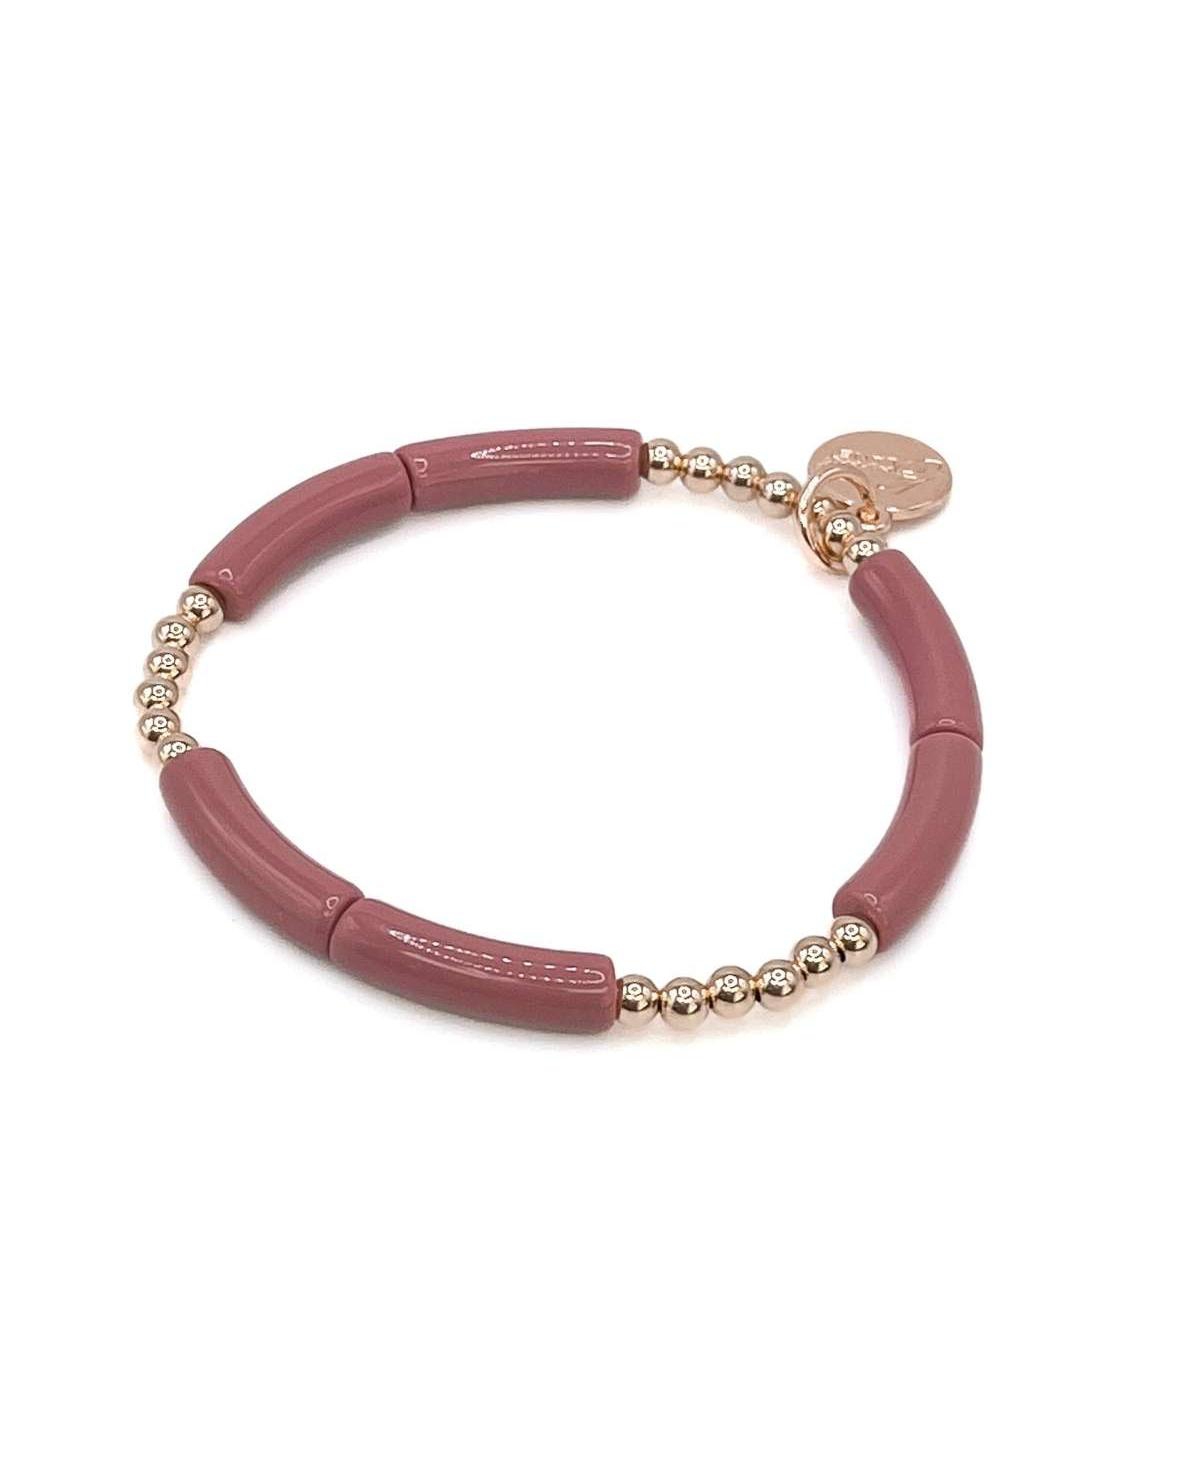 Non-Tarnishing Gold filled, 4mm Gold Ball and Acrylic Stretch Bracelet - Dusty rose